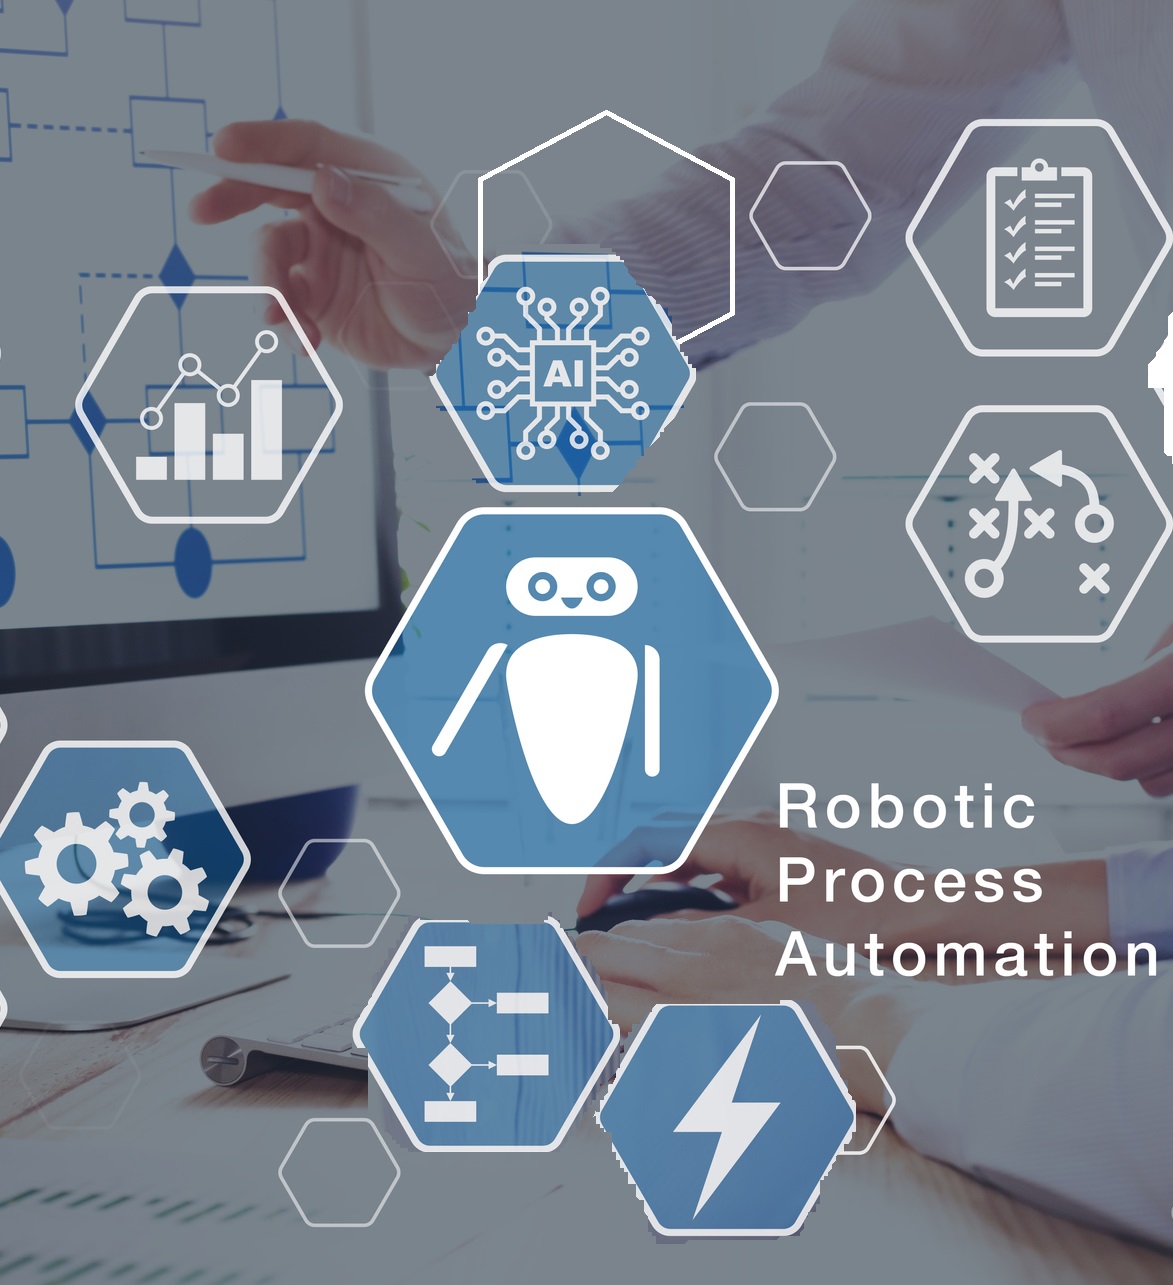 Robotic Process Automation (RPA) technology automate business tasks with direct integration of robots in company software user interface, concept with icons and people working in office on computer